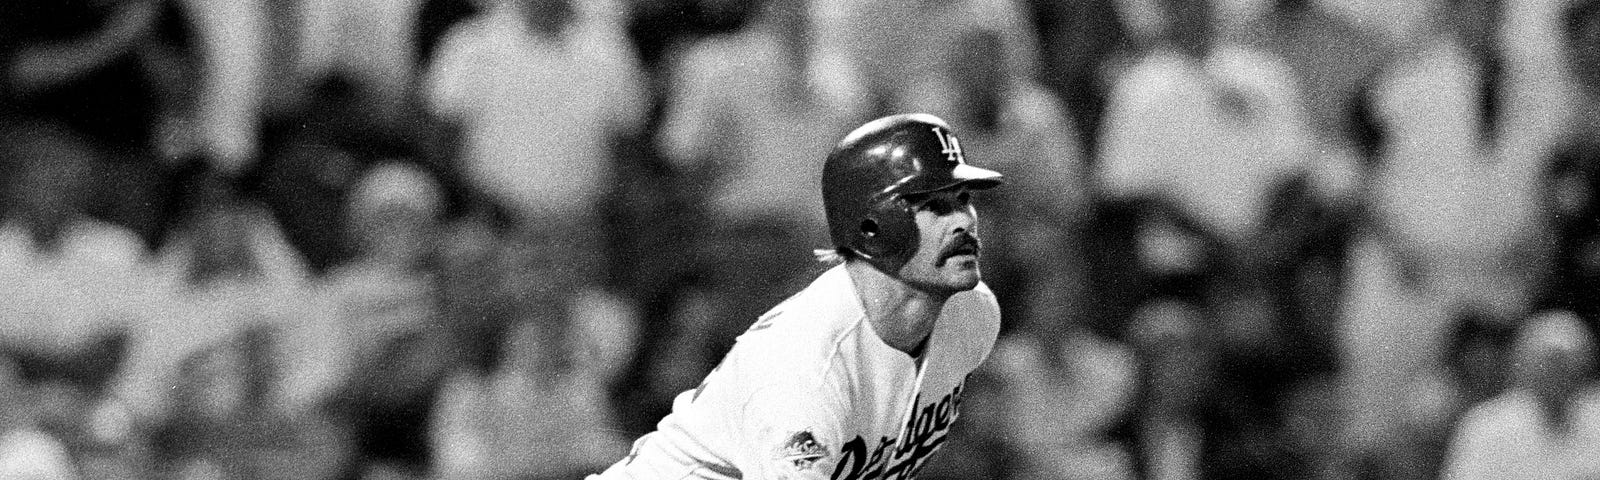 Kirk Gibson, also a legend to his teammates, by Cary Osborne